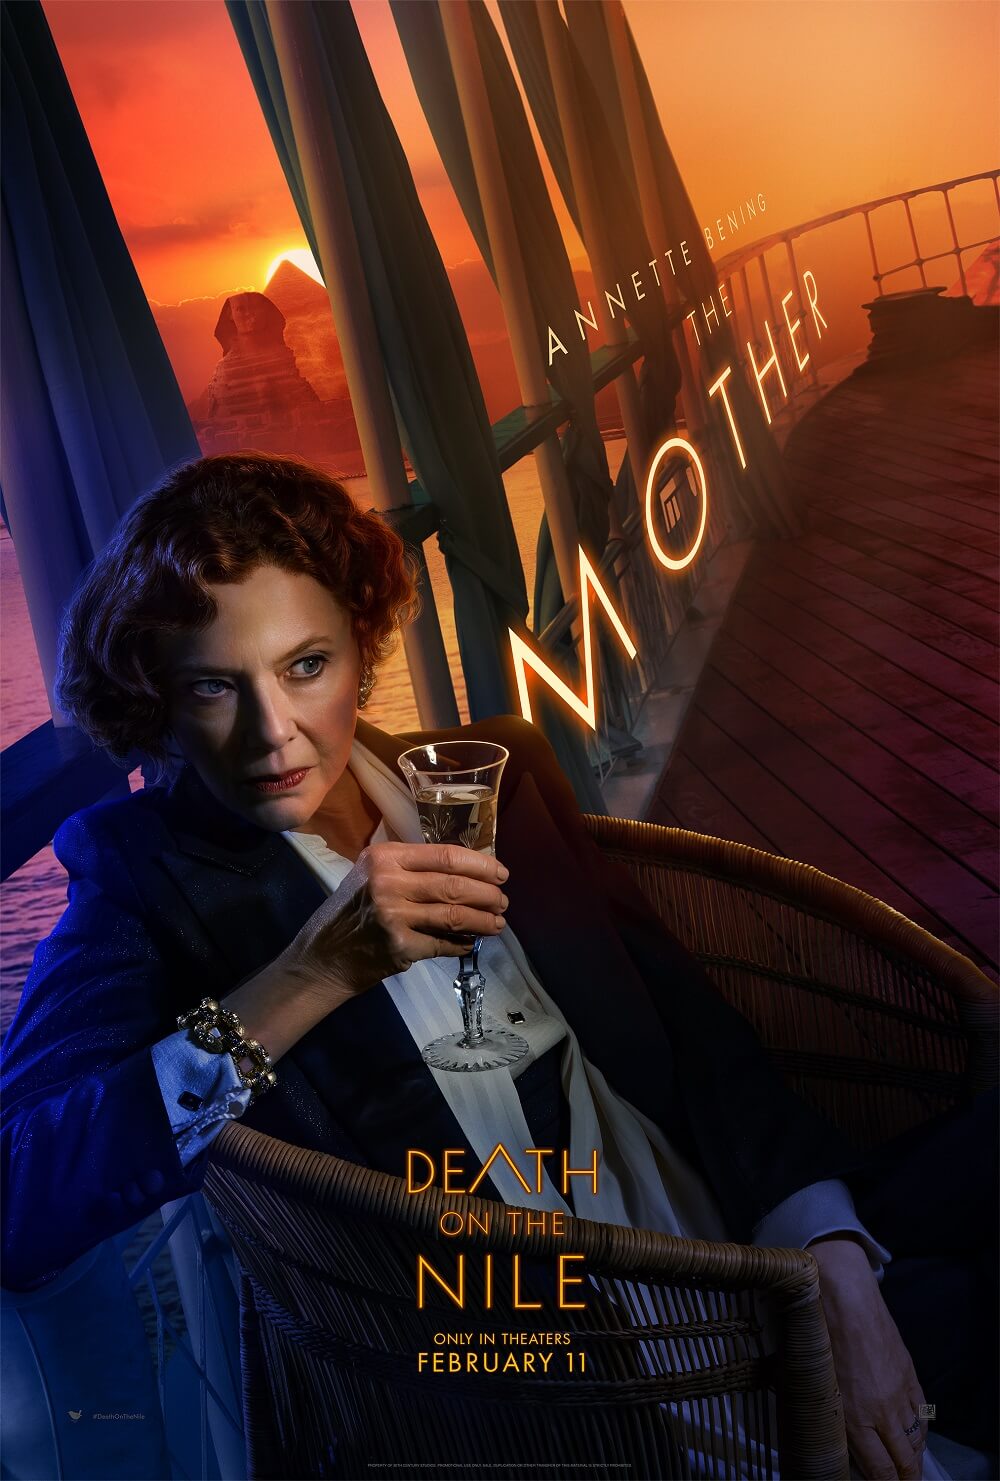 Death on the Nile released character posters passengers prepare to board the ship-6